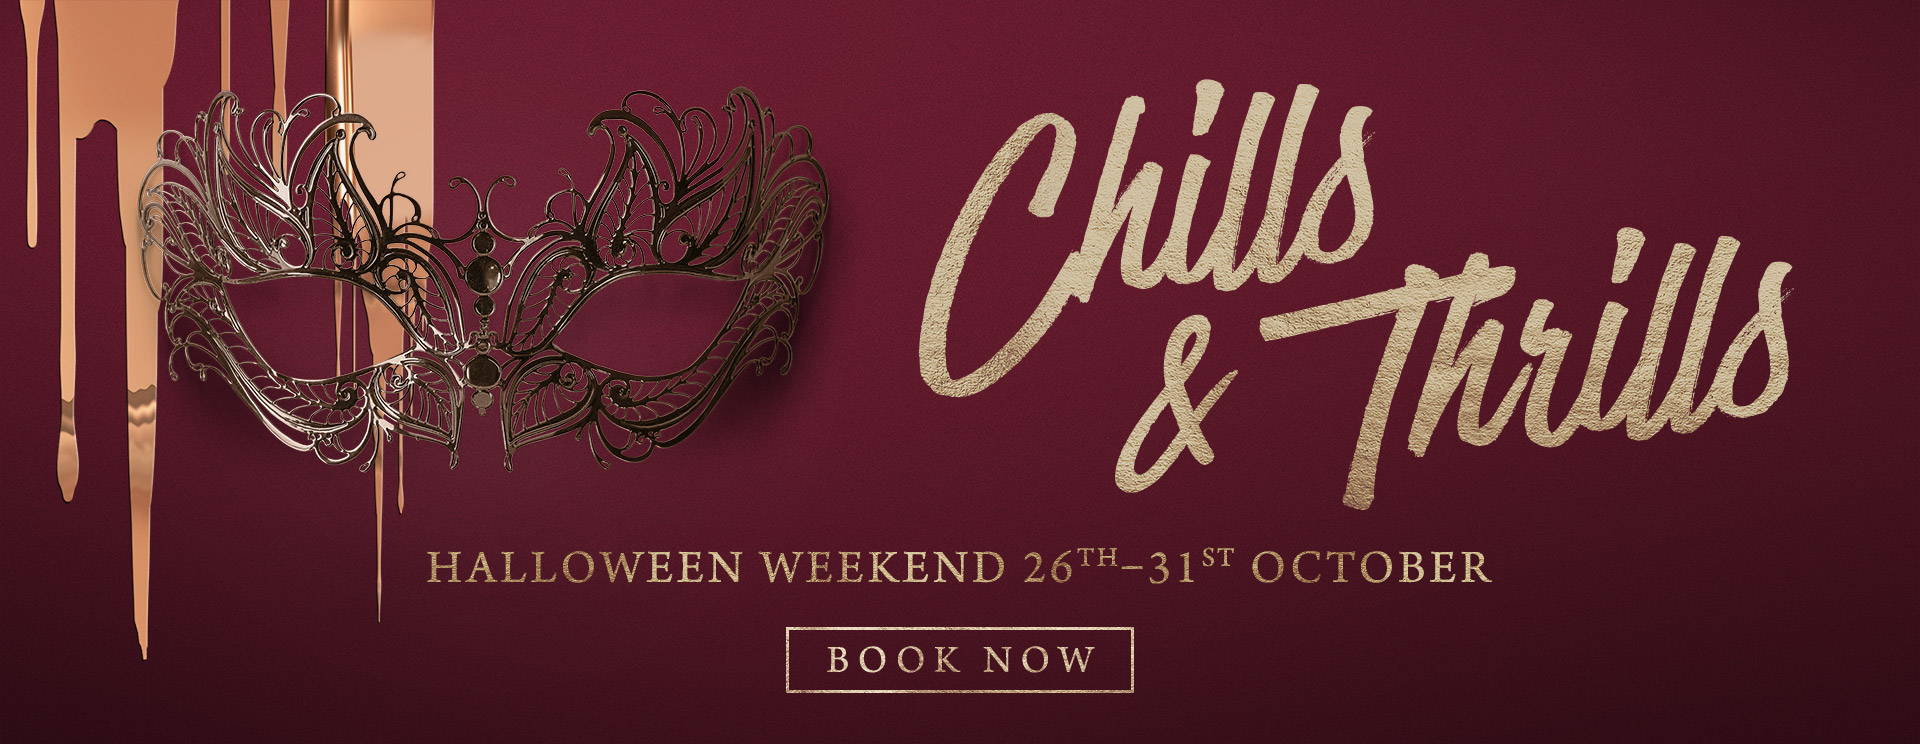 Chills & Thrills this Halloween at The Bell